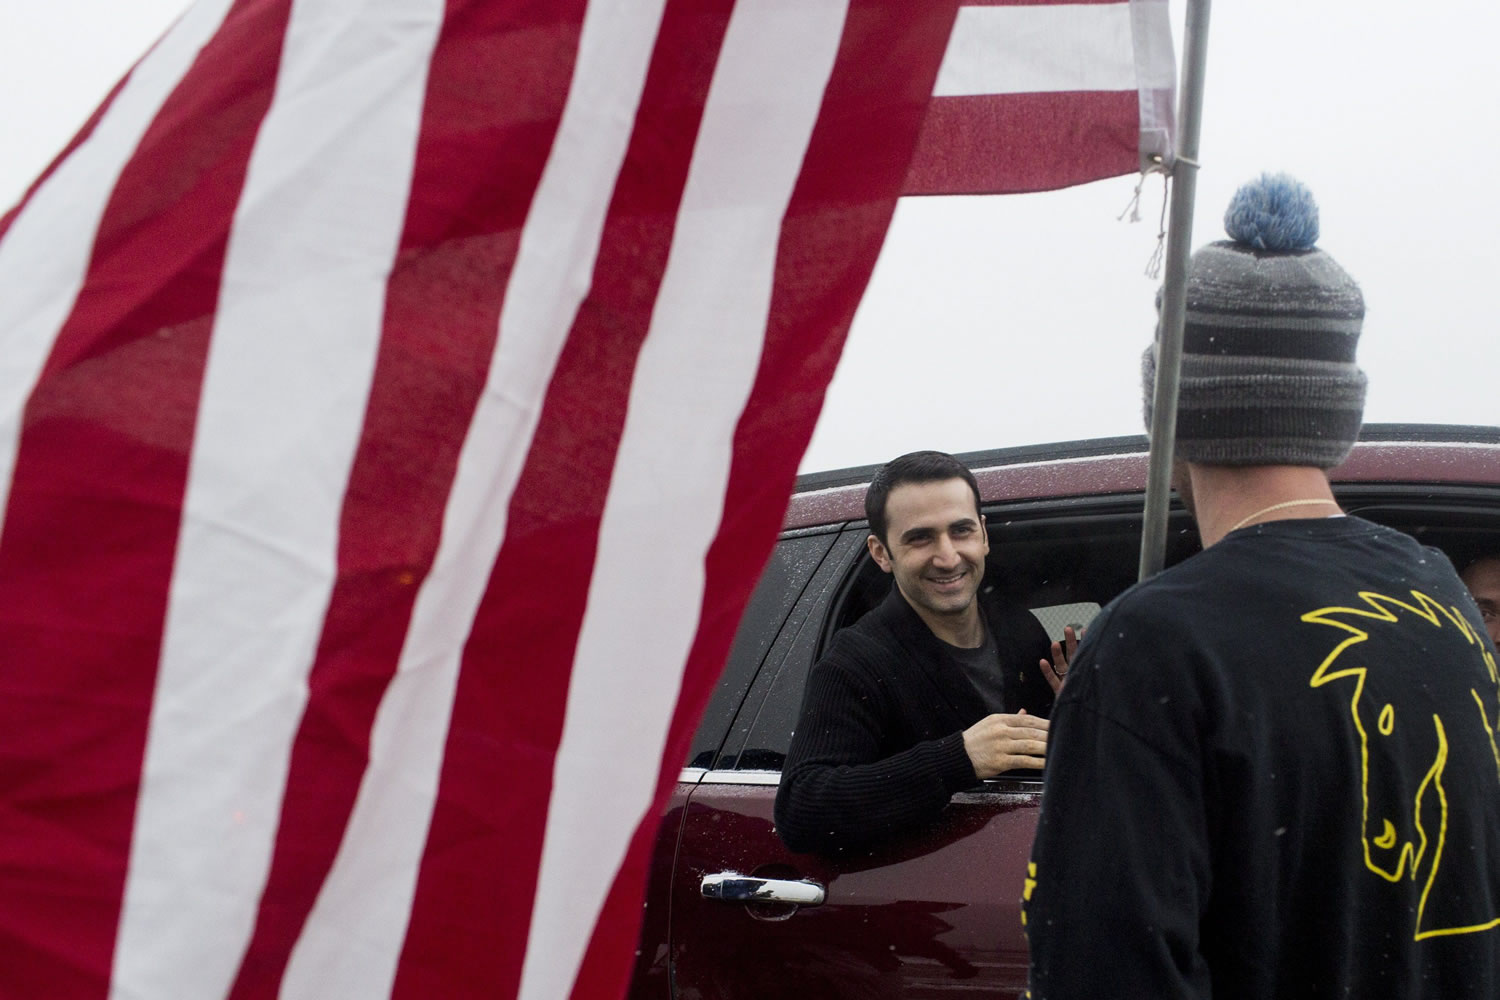 Amir Hekmati thanks the community following his return flight home on Thursday at Bishop International Airport in Flint, Mich. He returns after being imprisoned in Iran for more than four years.